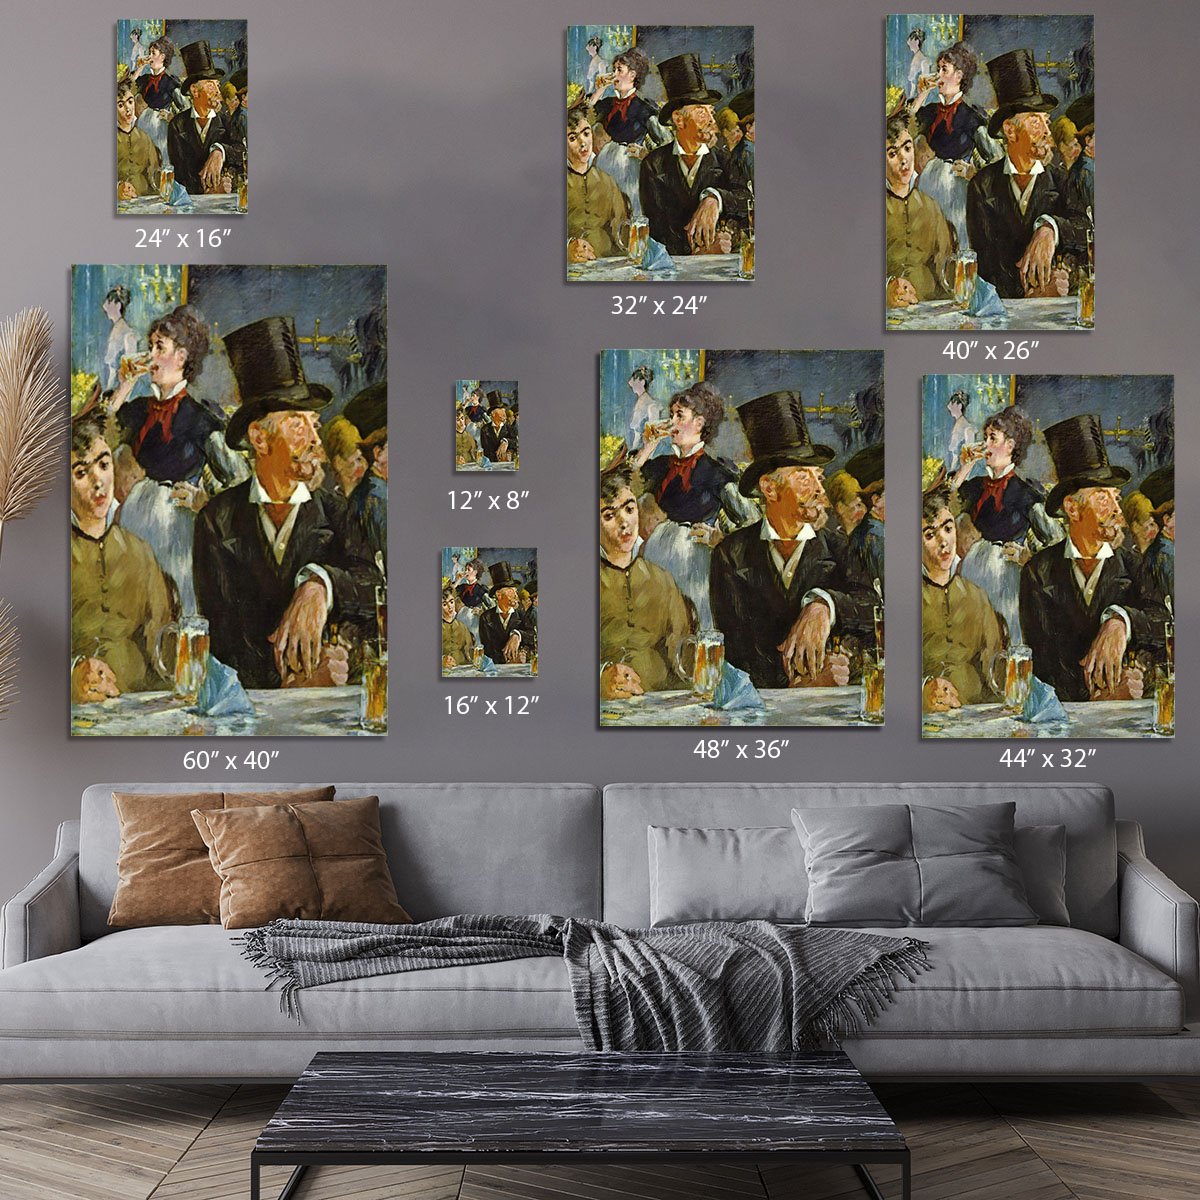 Cafe Concert by Manet Canvas Print or Poster